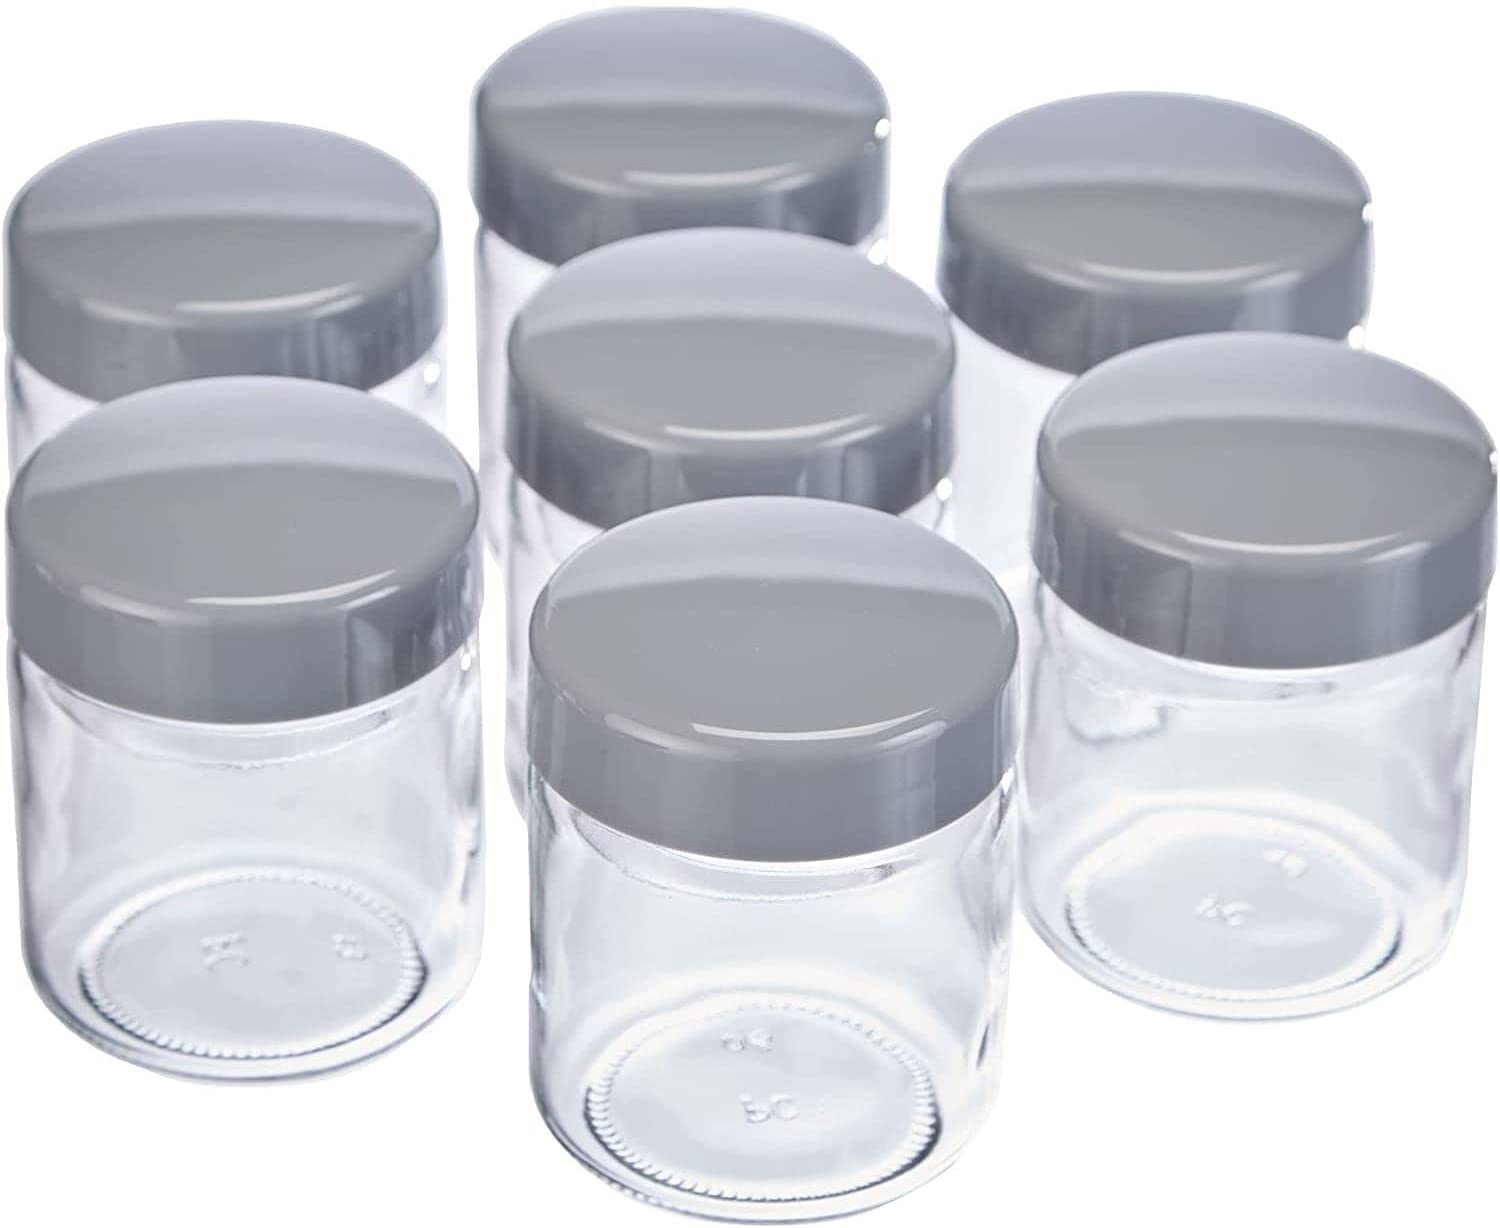 SEVERIN Replacement jars for yoghurt makers, yoghurt glasses with lids (7 x 150 ml), suitable for the Severin yoghurt machines JG 3516 / JG 3518 / JG3519 / JG 3520 / JG 3521 and JG 3525, grey, EG 3513